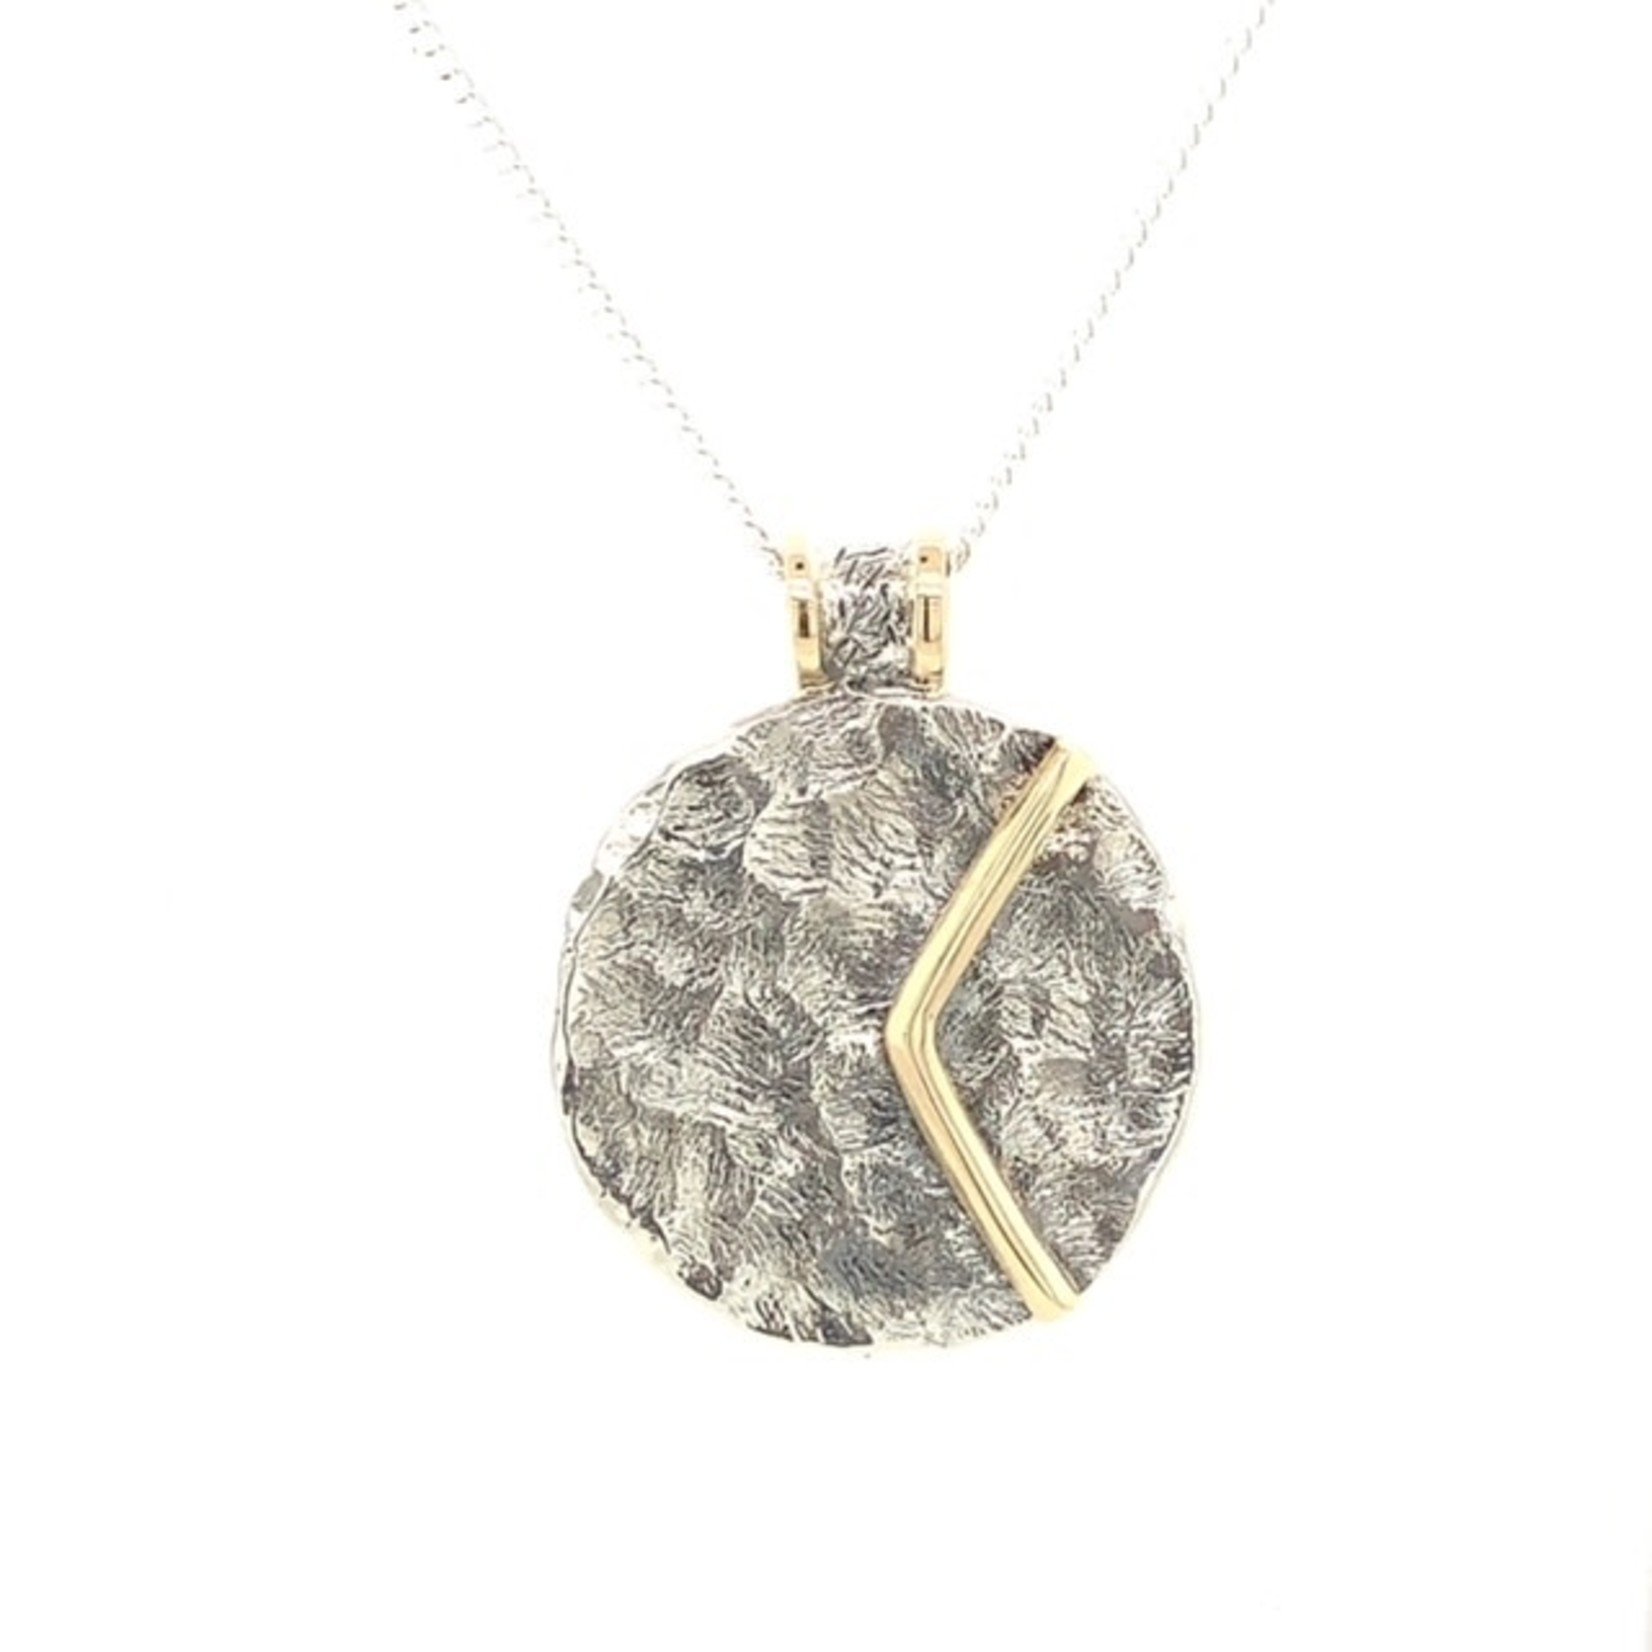 On The Edge Hermosa Guerrera Necklace Spain Collection